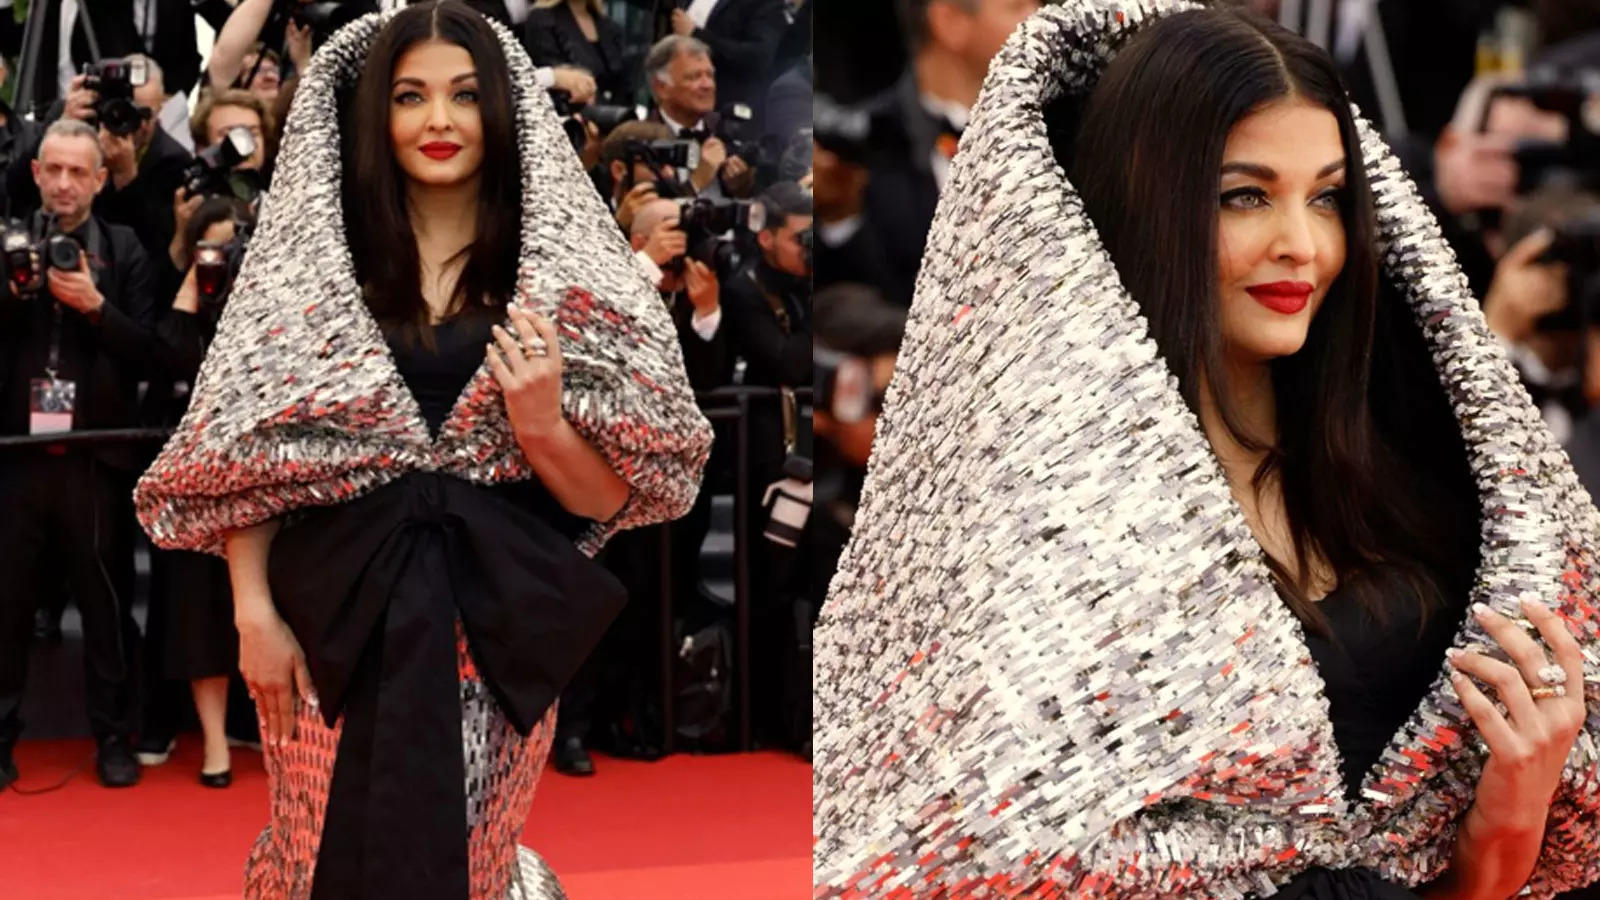 Aishwarya Rai Bachchan turns up at the Cannes 2023 red carpet wearing a giant silver hood; netizen calls it's a 'foil wrap' | Hindi Movie News - Bollywood - Times of India